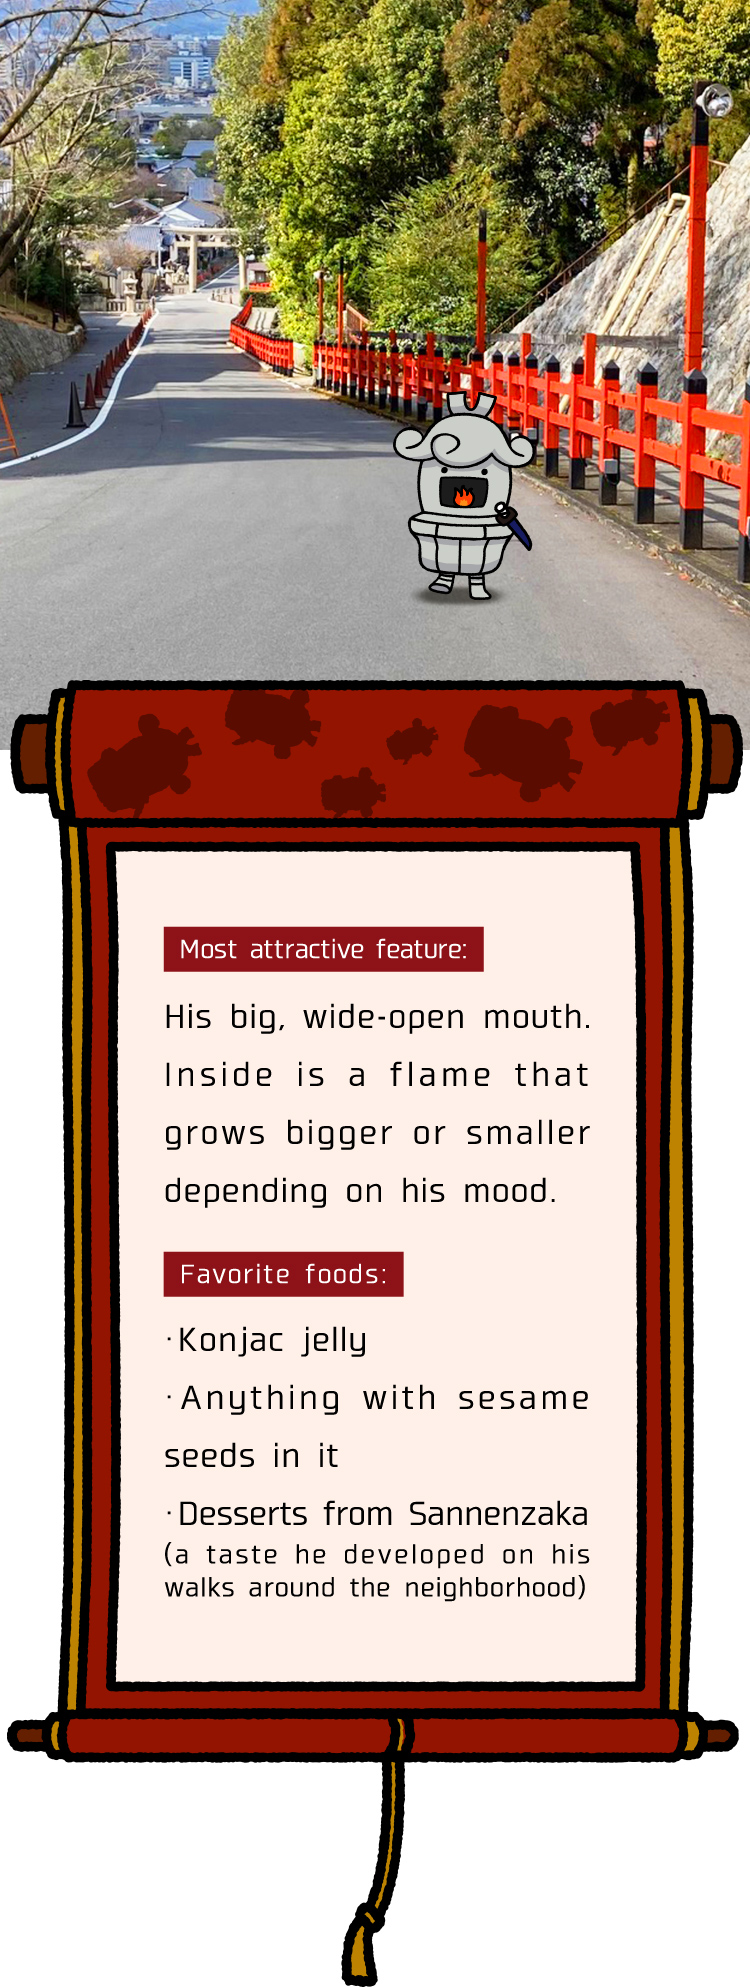 Most attractive feature is His big, wide-open mouth. Inside is a flame that grows bigger or smaller depending on his mood. Favorite foods are konjac jelly, anything with sesame seeds in it and desserts from Sannenzaka (A taste he developed on his walks around the neighborhood).